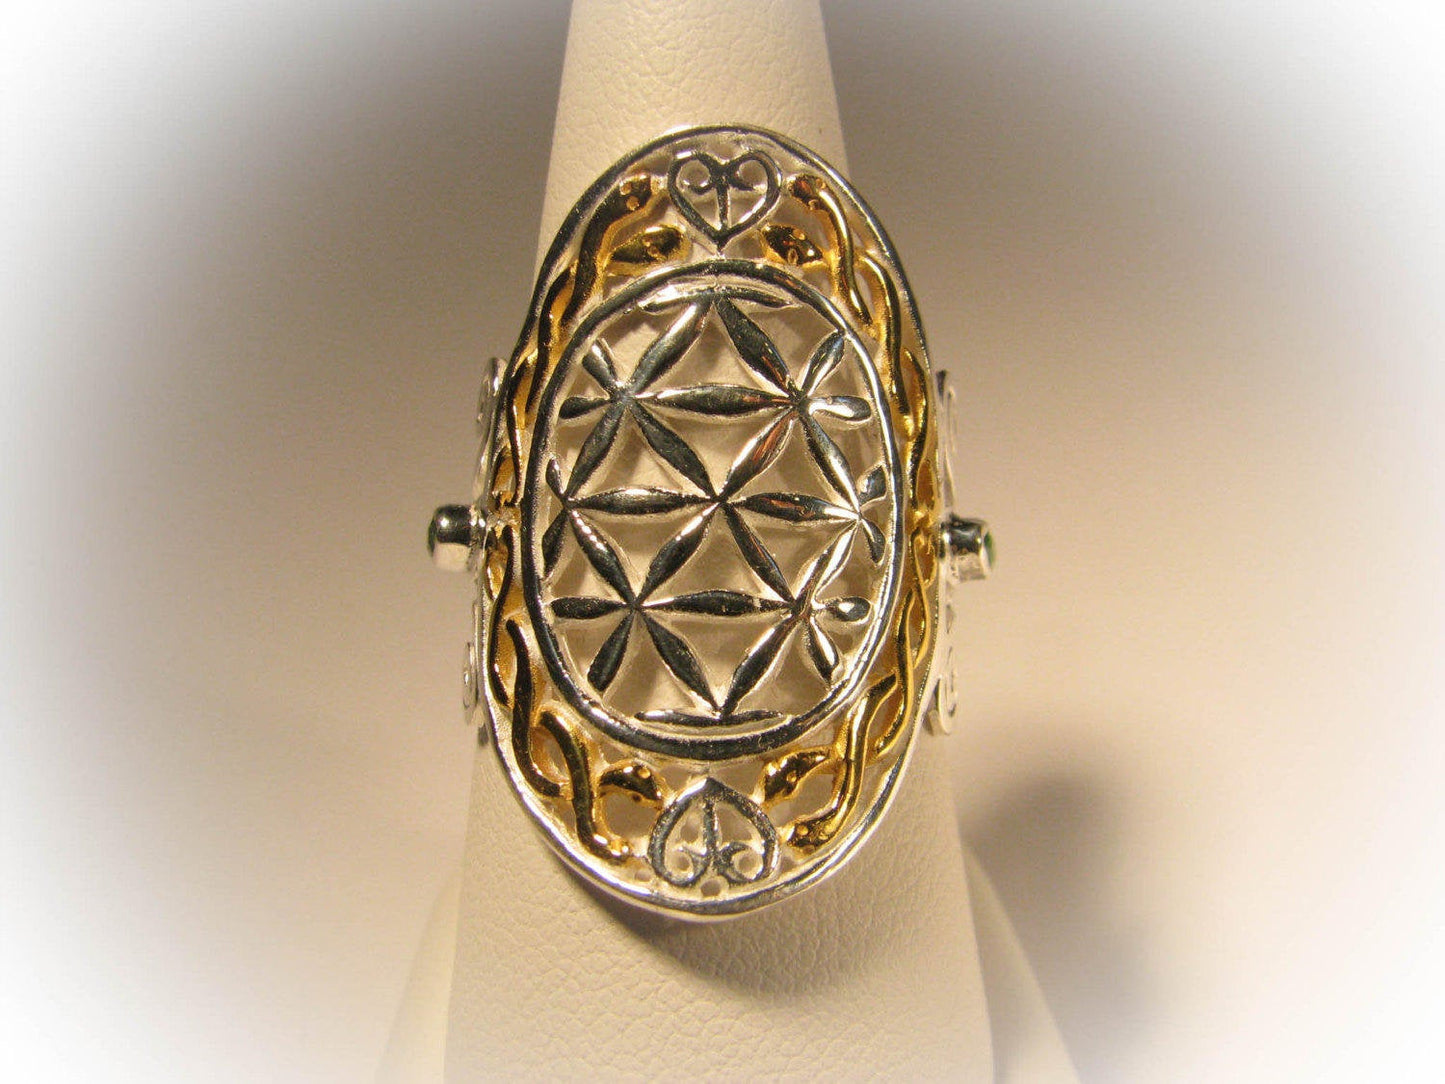 Flower of Life Ring - Shorty - 24K Gold Plated / Sterling Silver